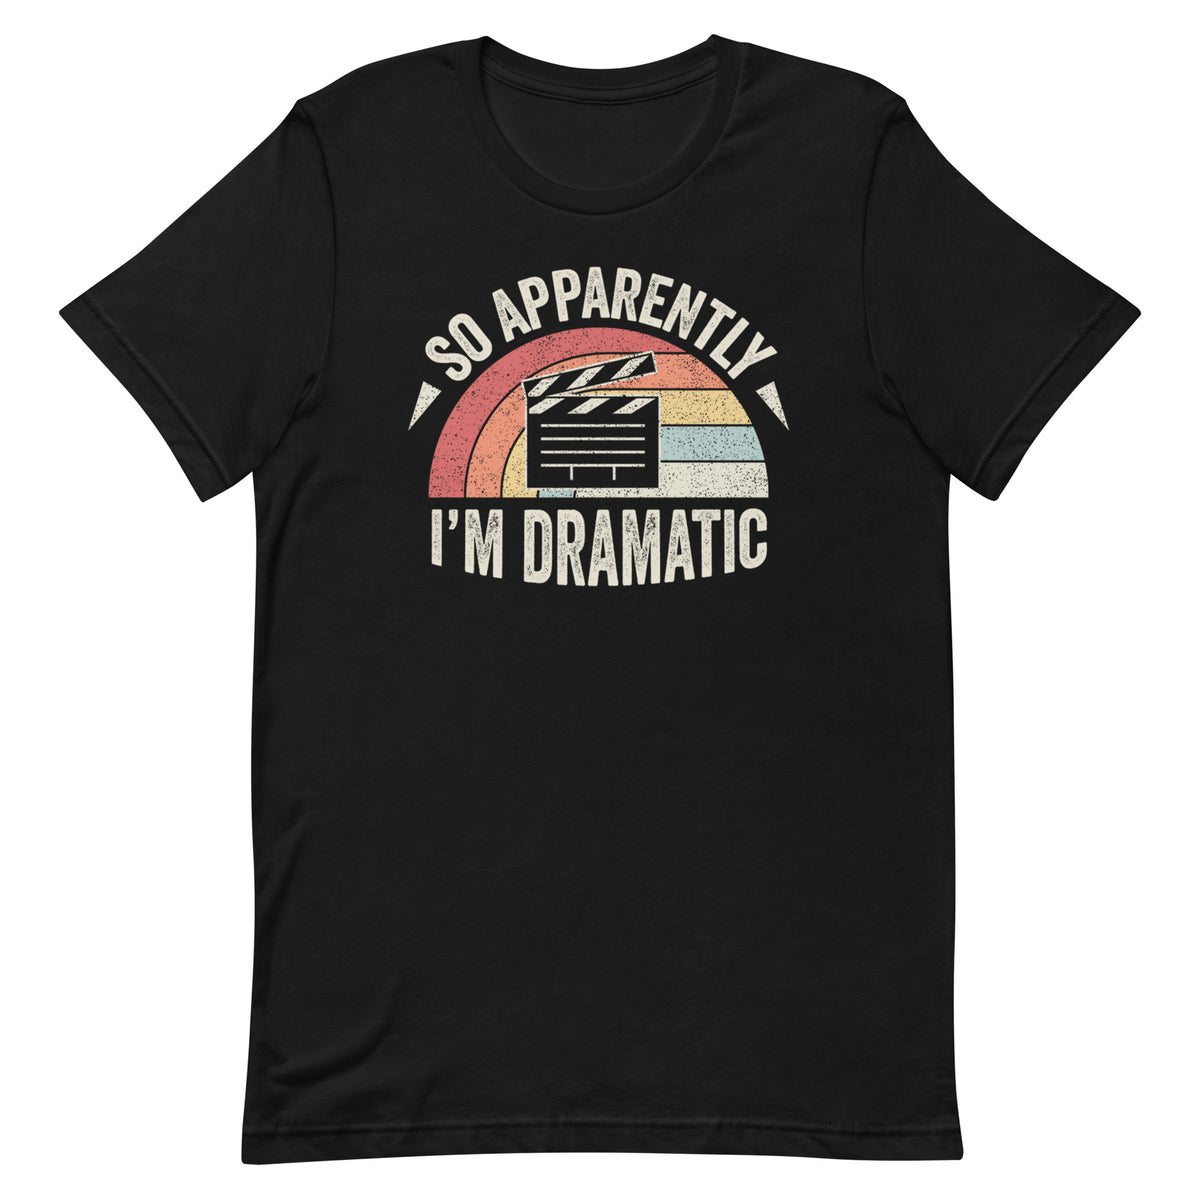 So Apparently I'm Dramatic Funny Actor Actress Unisex t-shirt